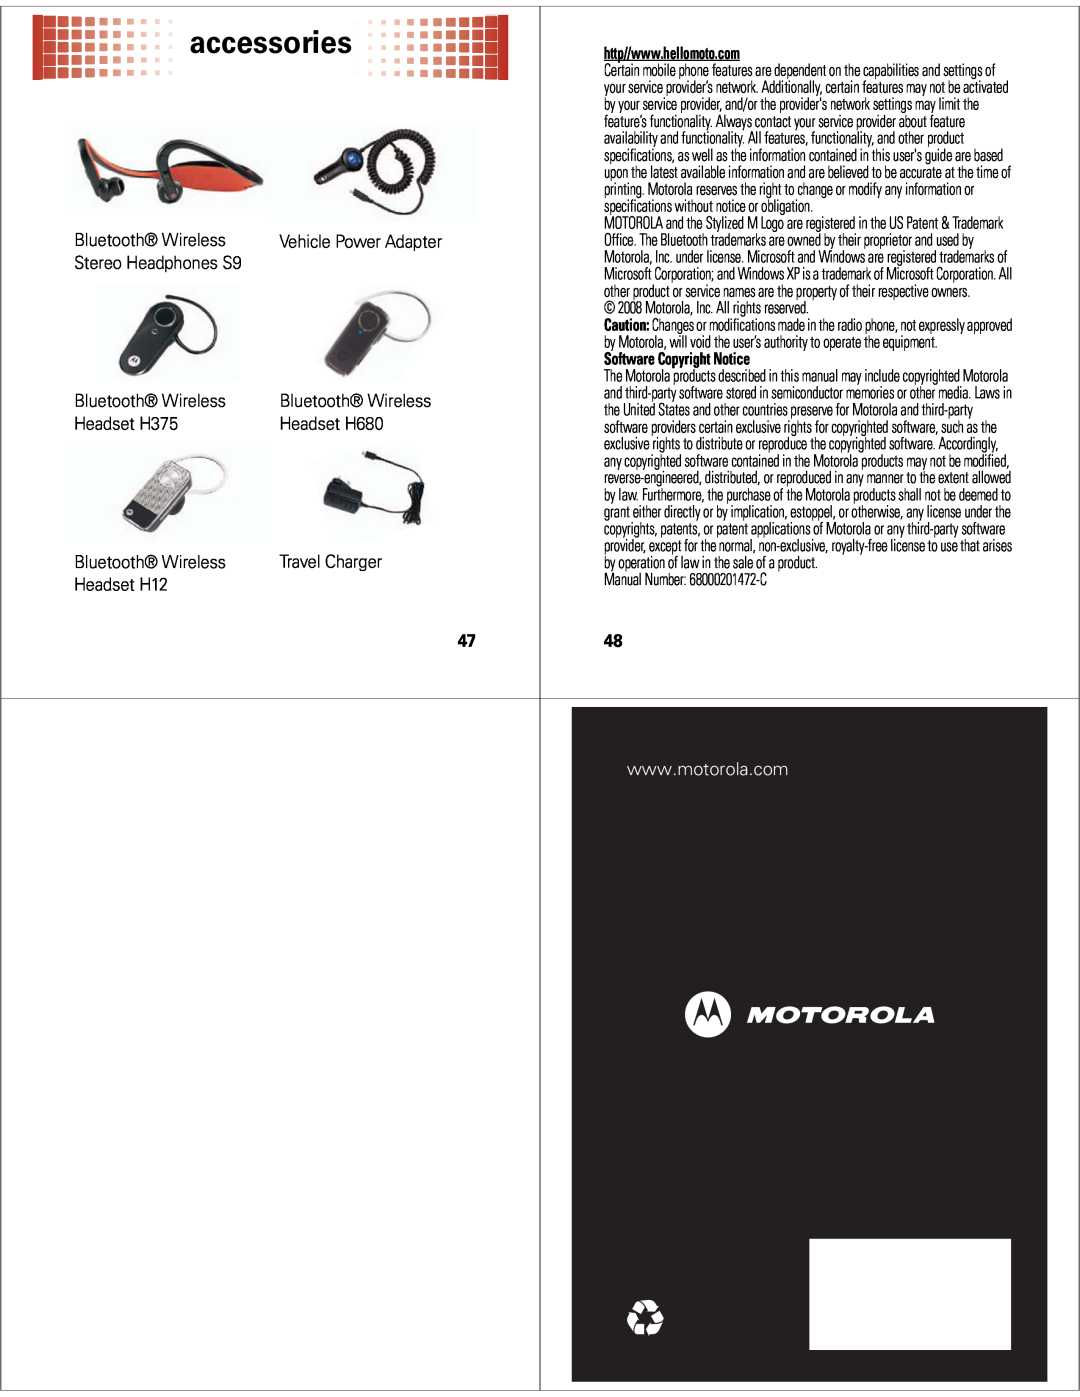 Motorola 68000201472-C accessories, Motorola, Inc. All rights reserved, Software Copyright Notice, Vehicle Power Adapter 